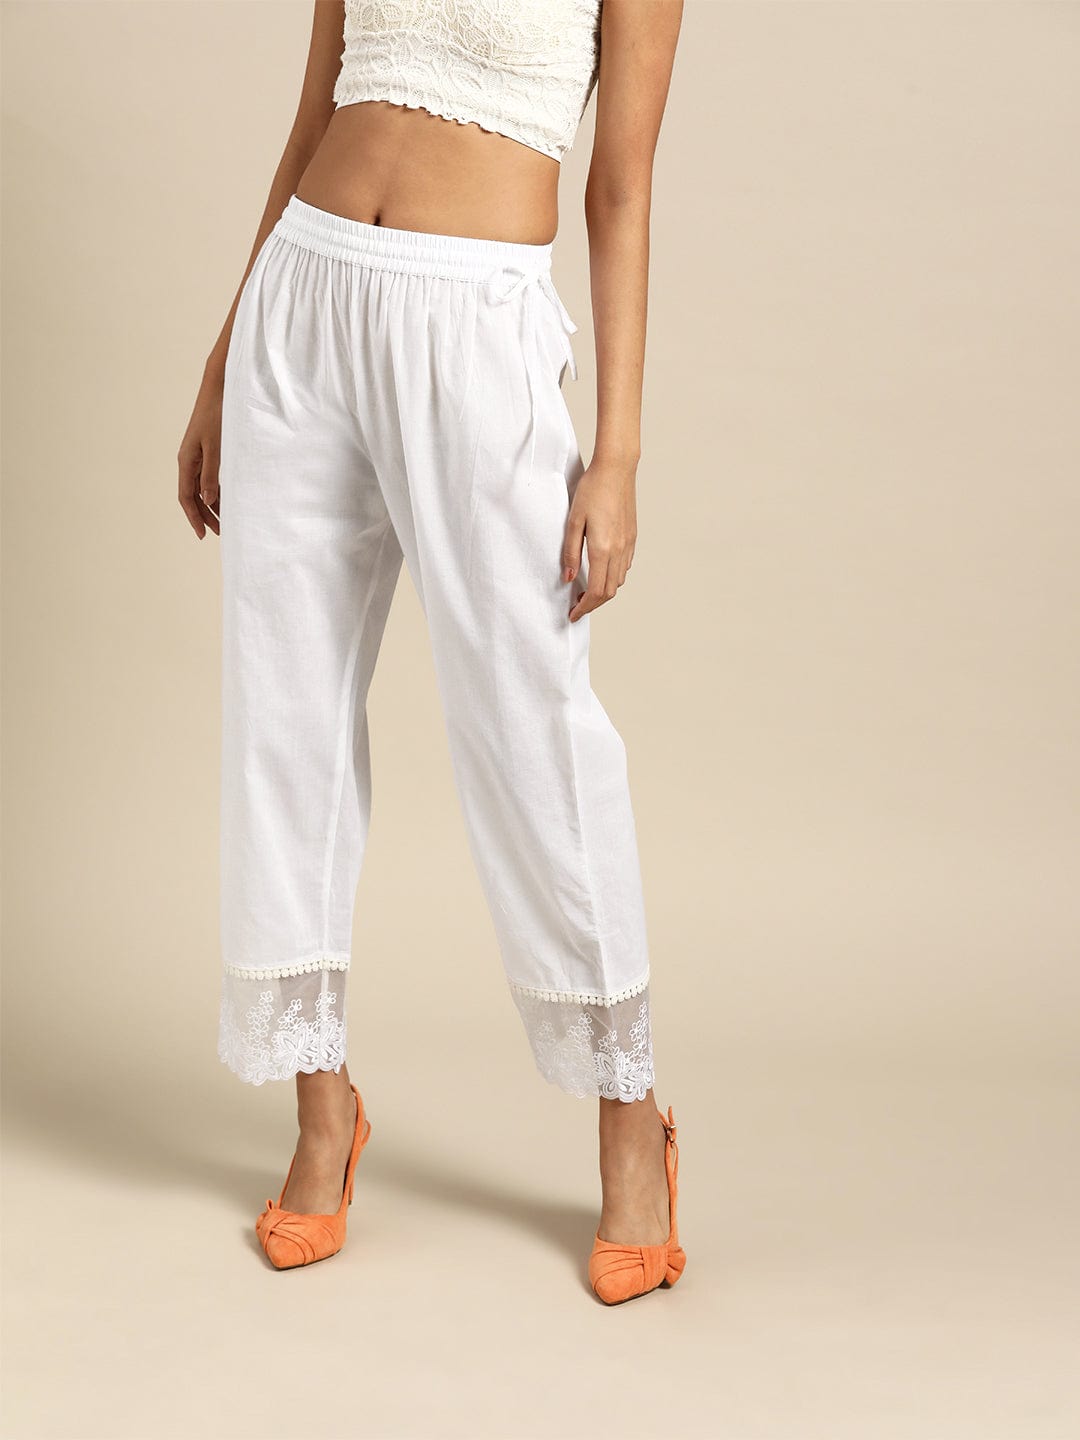 Women's White Trousers | White Cargo & Tailored Trousers - Reiss UK